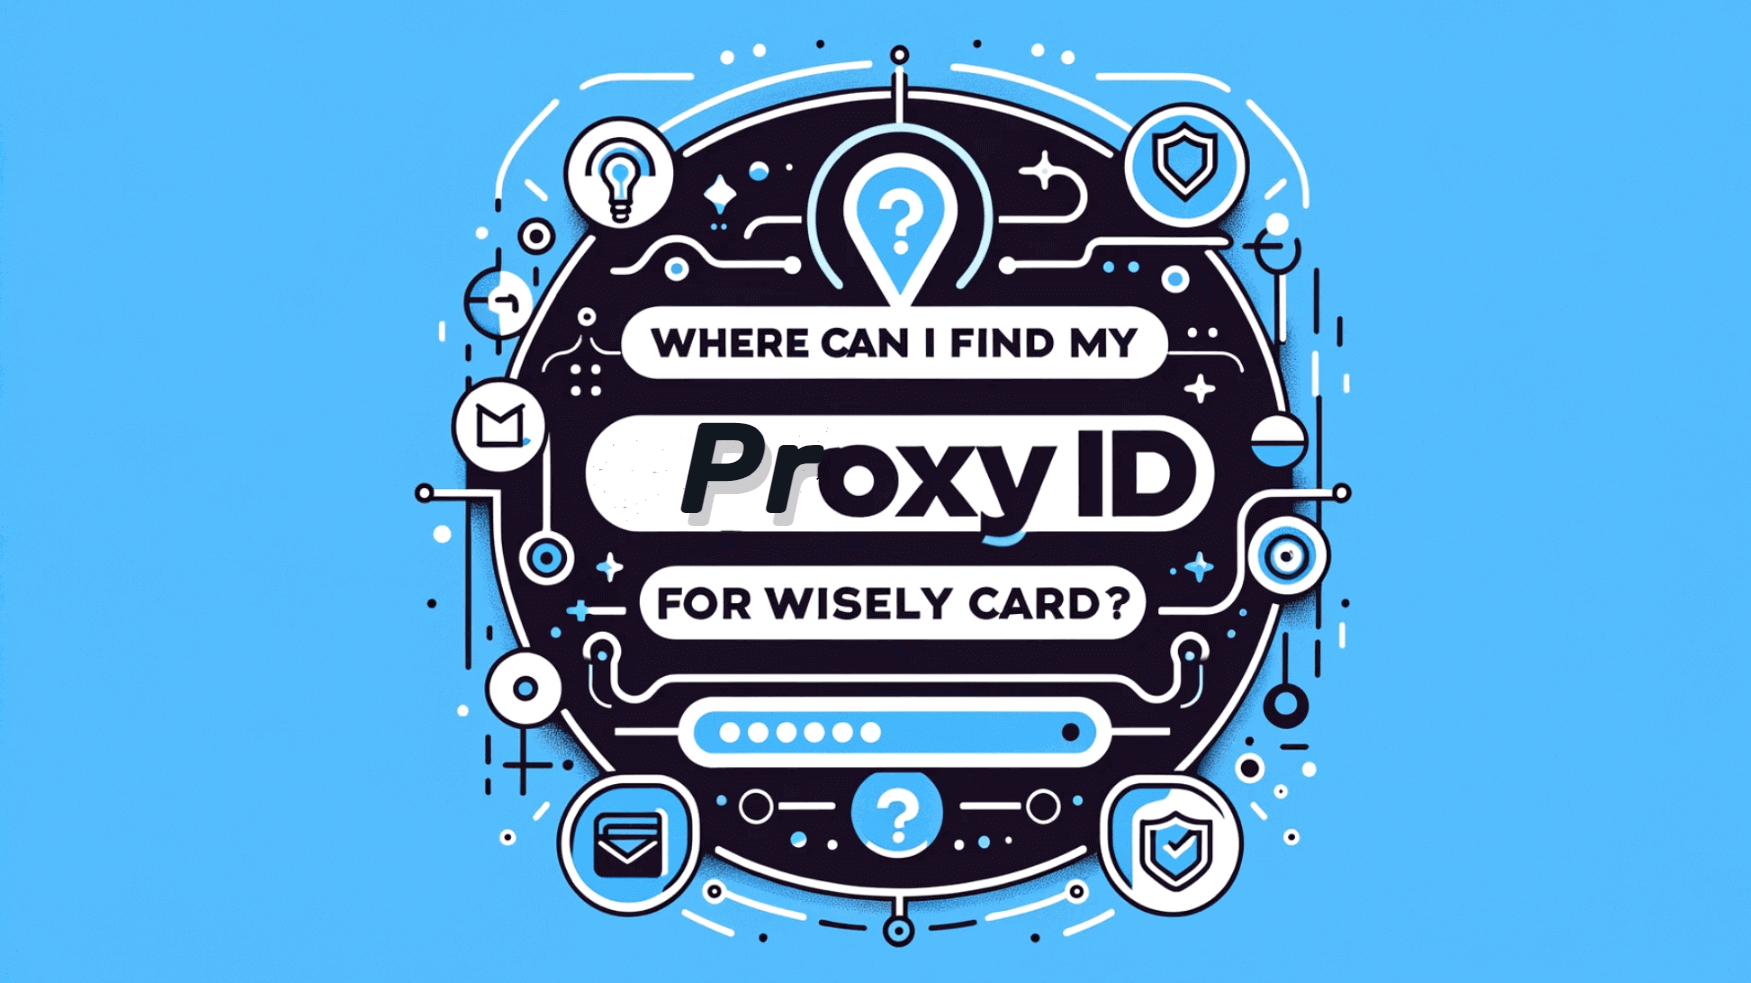 Where Can I Find My Proxy Id For Wisely Card